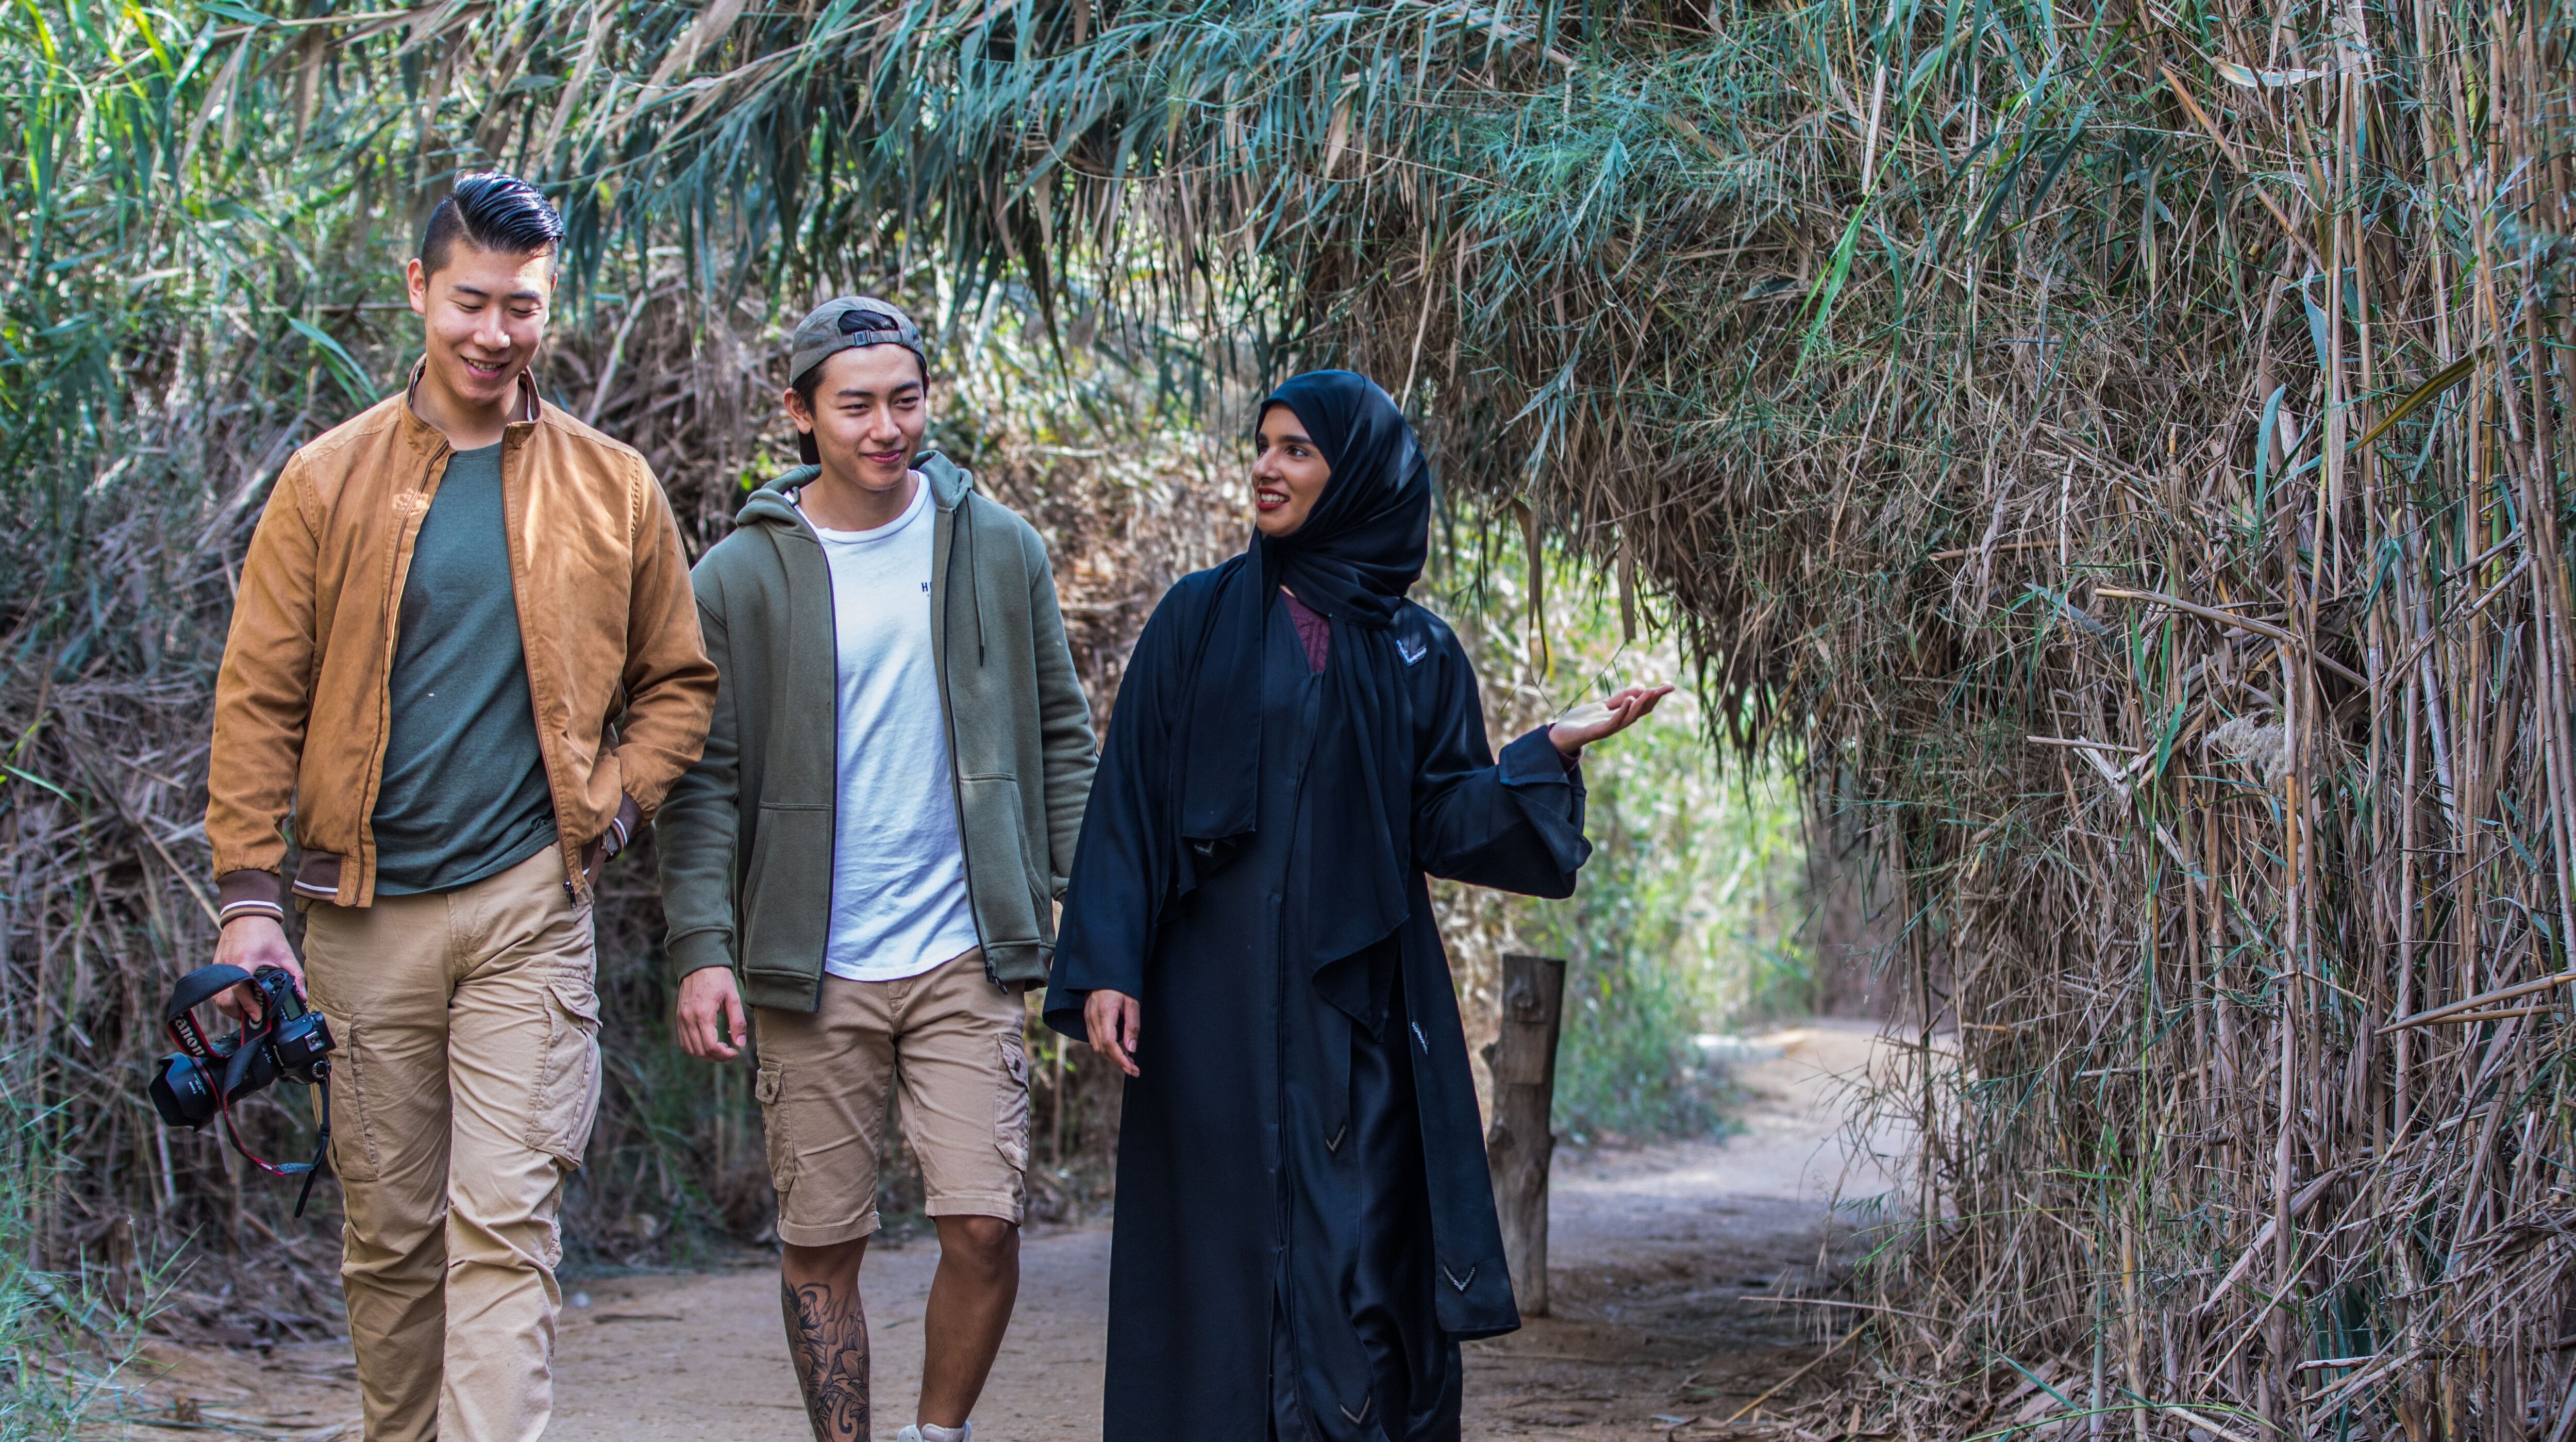 A female Emirati tourist guide with two Asian men amidst the nature in Abu Dhabi Emirate